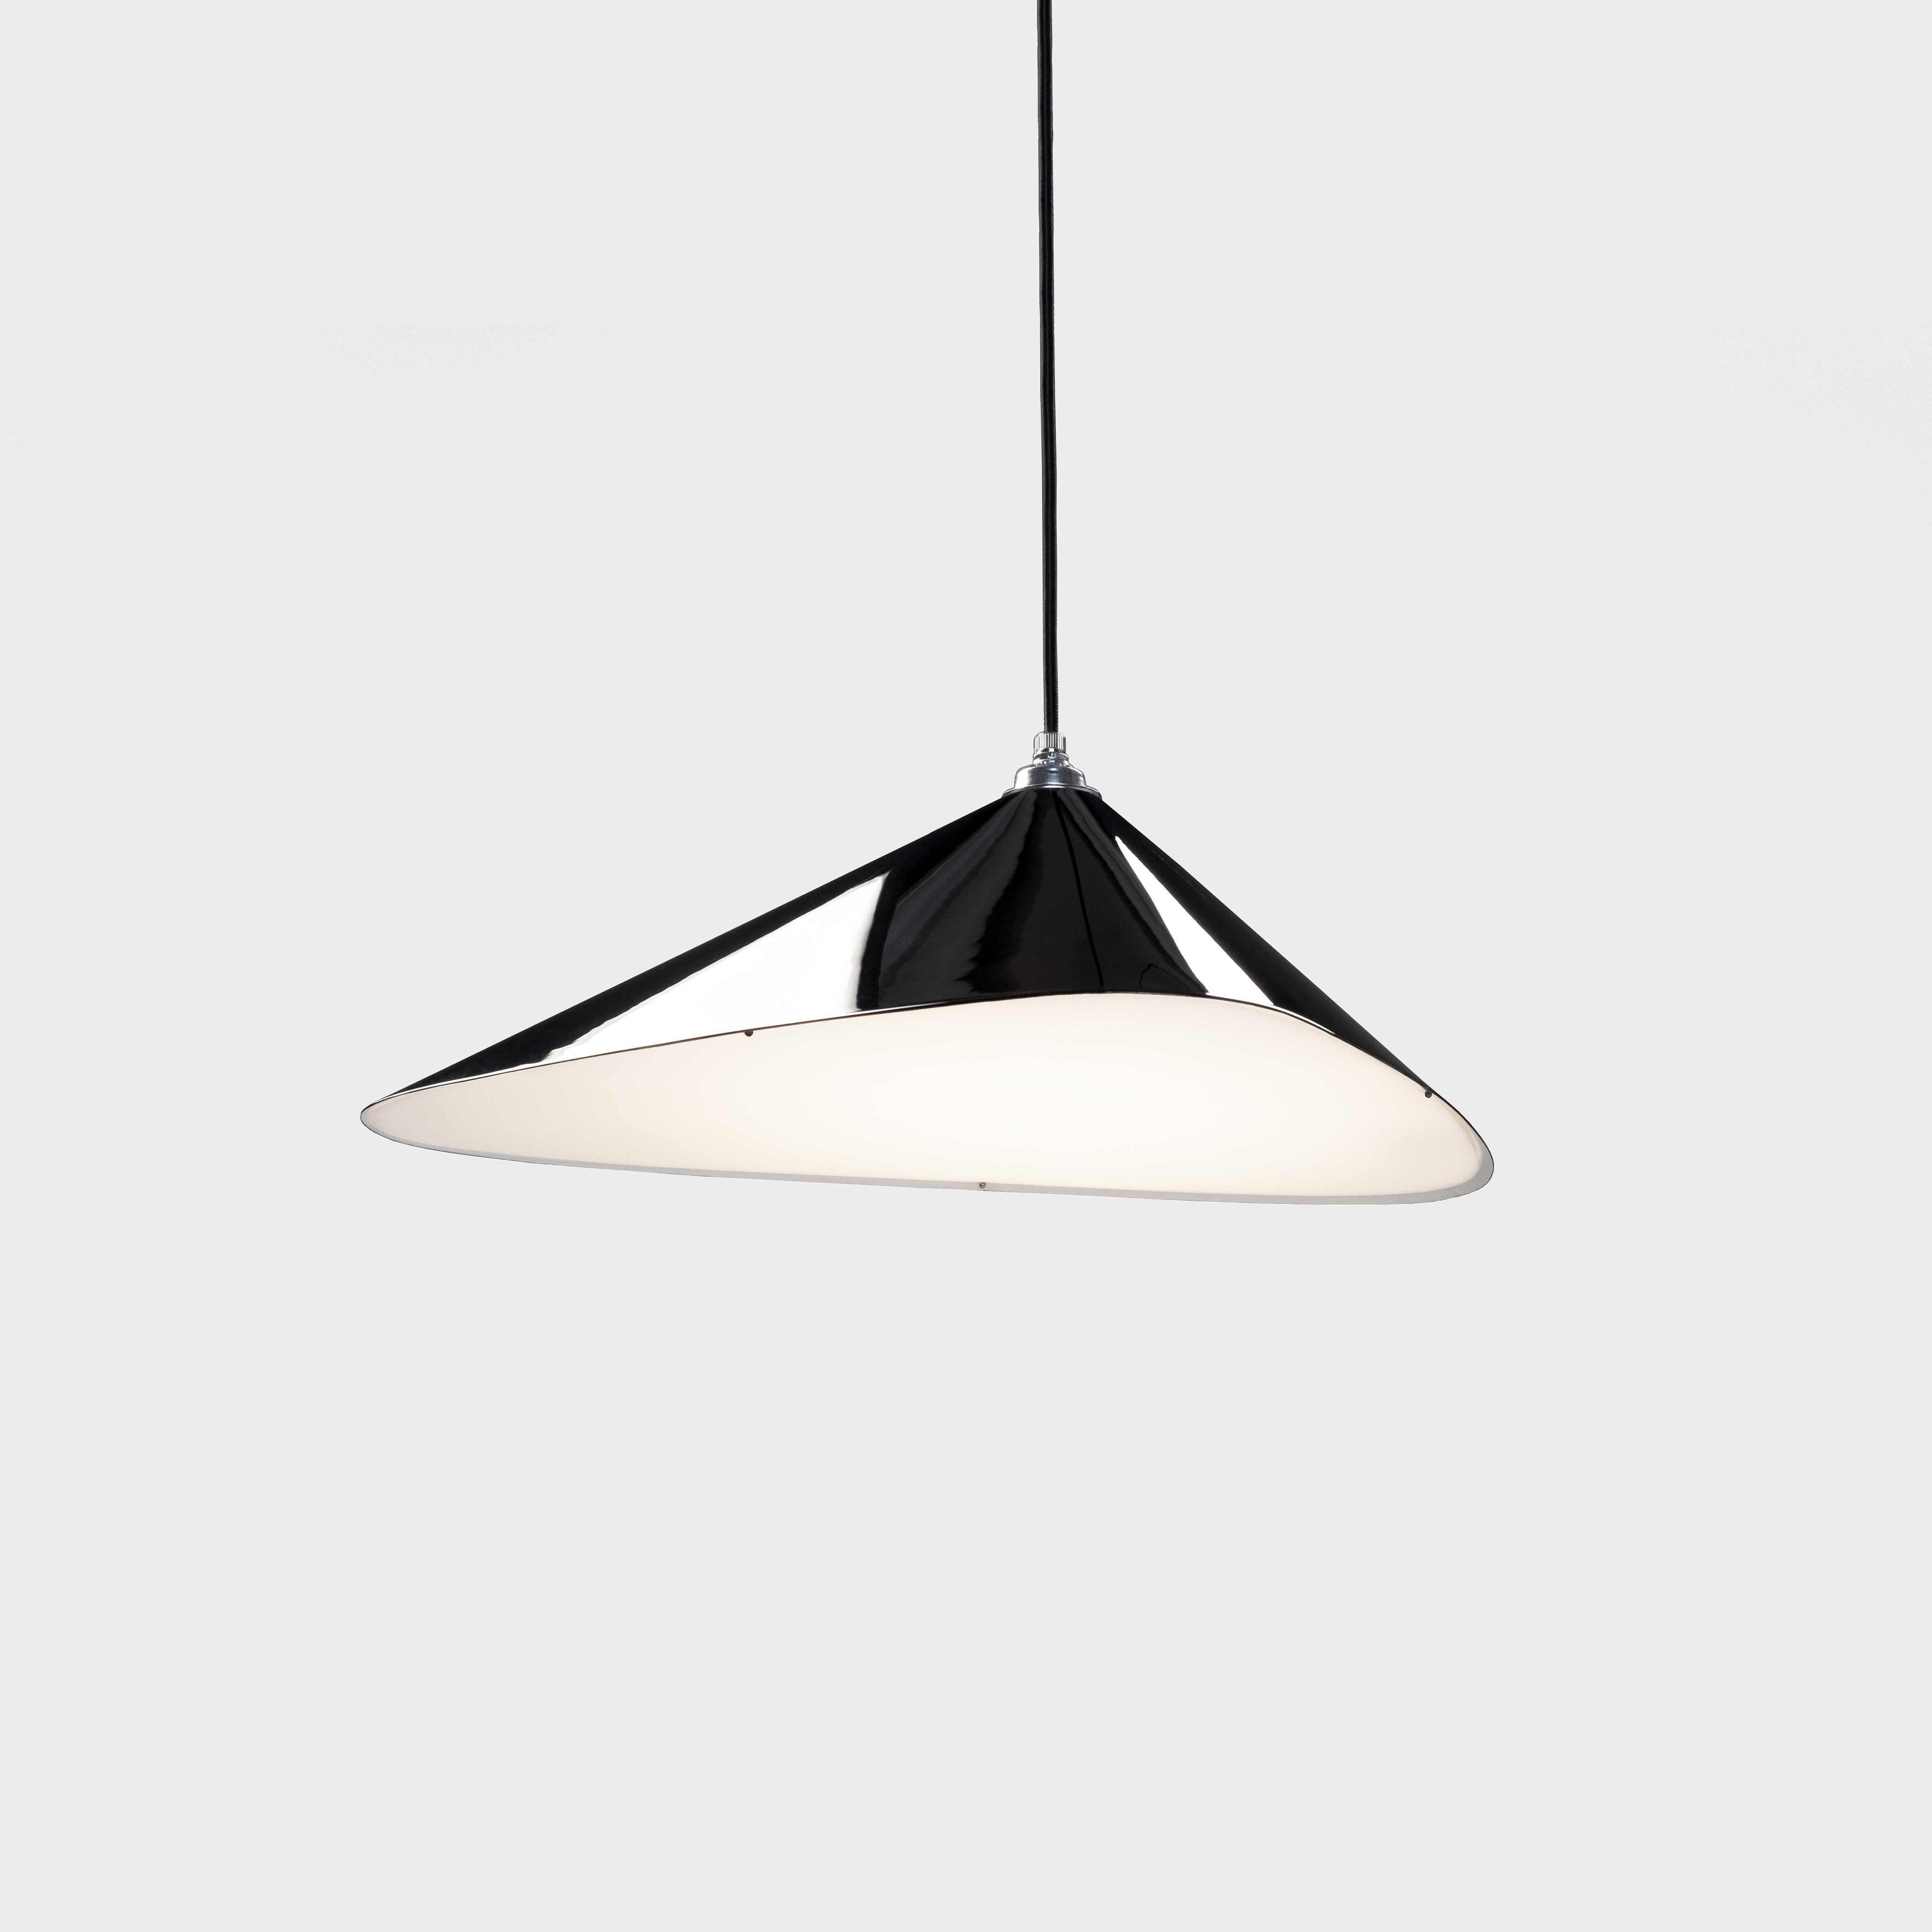 Daniel Becker 'Emily I' pendant lamp. Designed by Berlin luminary Daniel Becker and handmade to order using midcentury manufacturing techniques. Executed in high-quality sheet metal with up to ten layers glossy or matte black paint applied in a